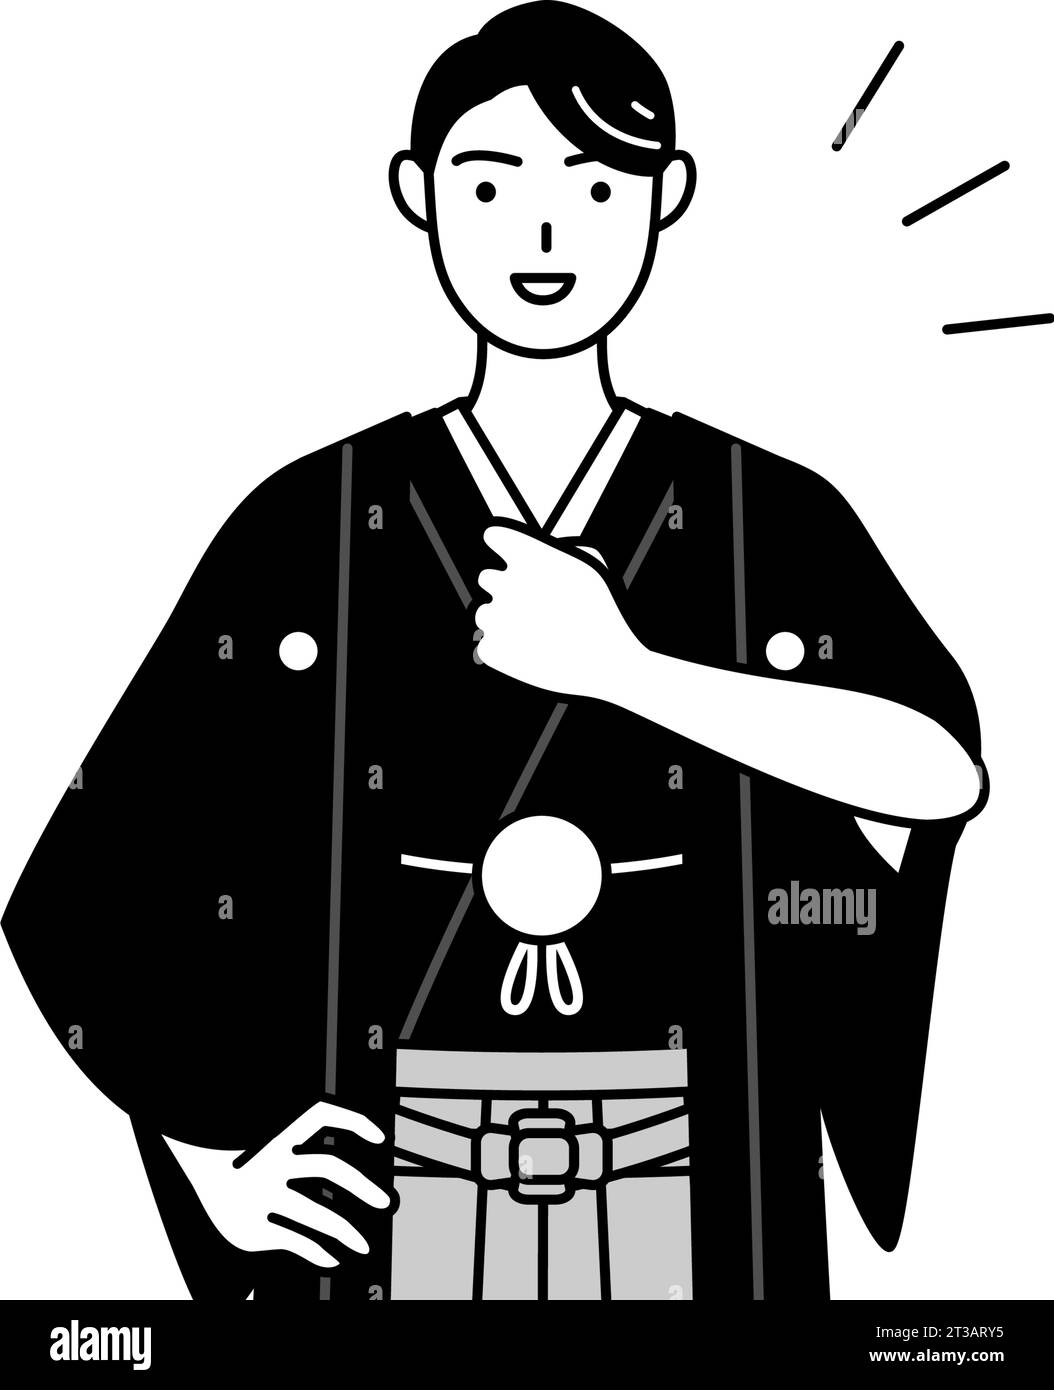 Man wearing Hakama with crest tapping his chest, Vector Illustration ...